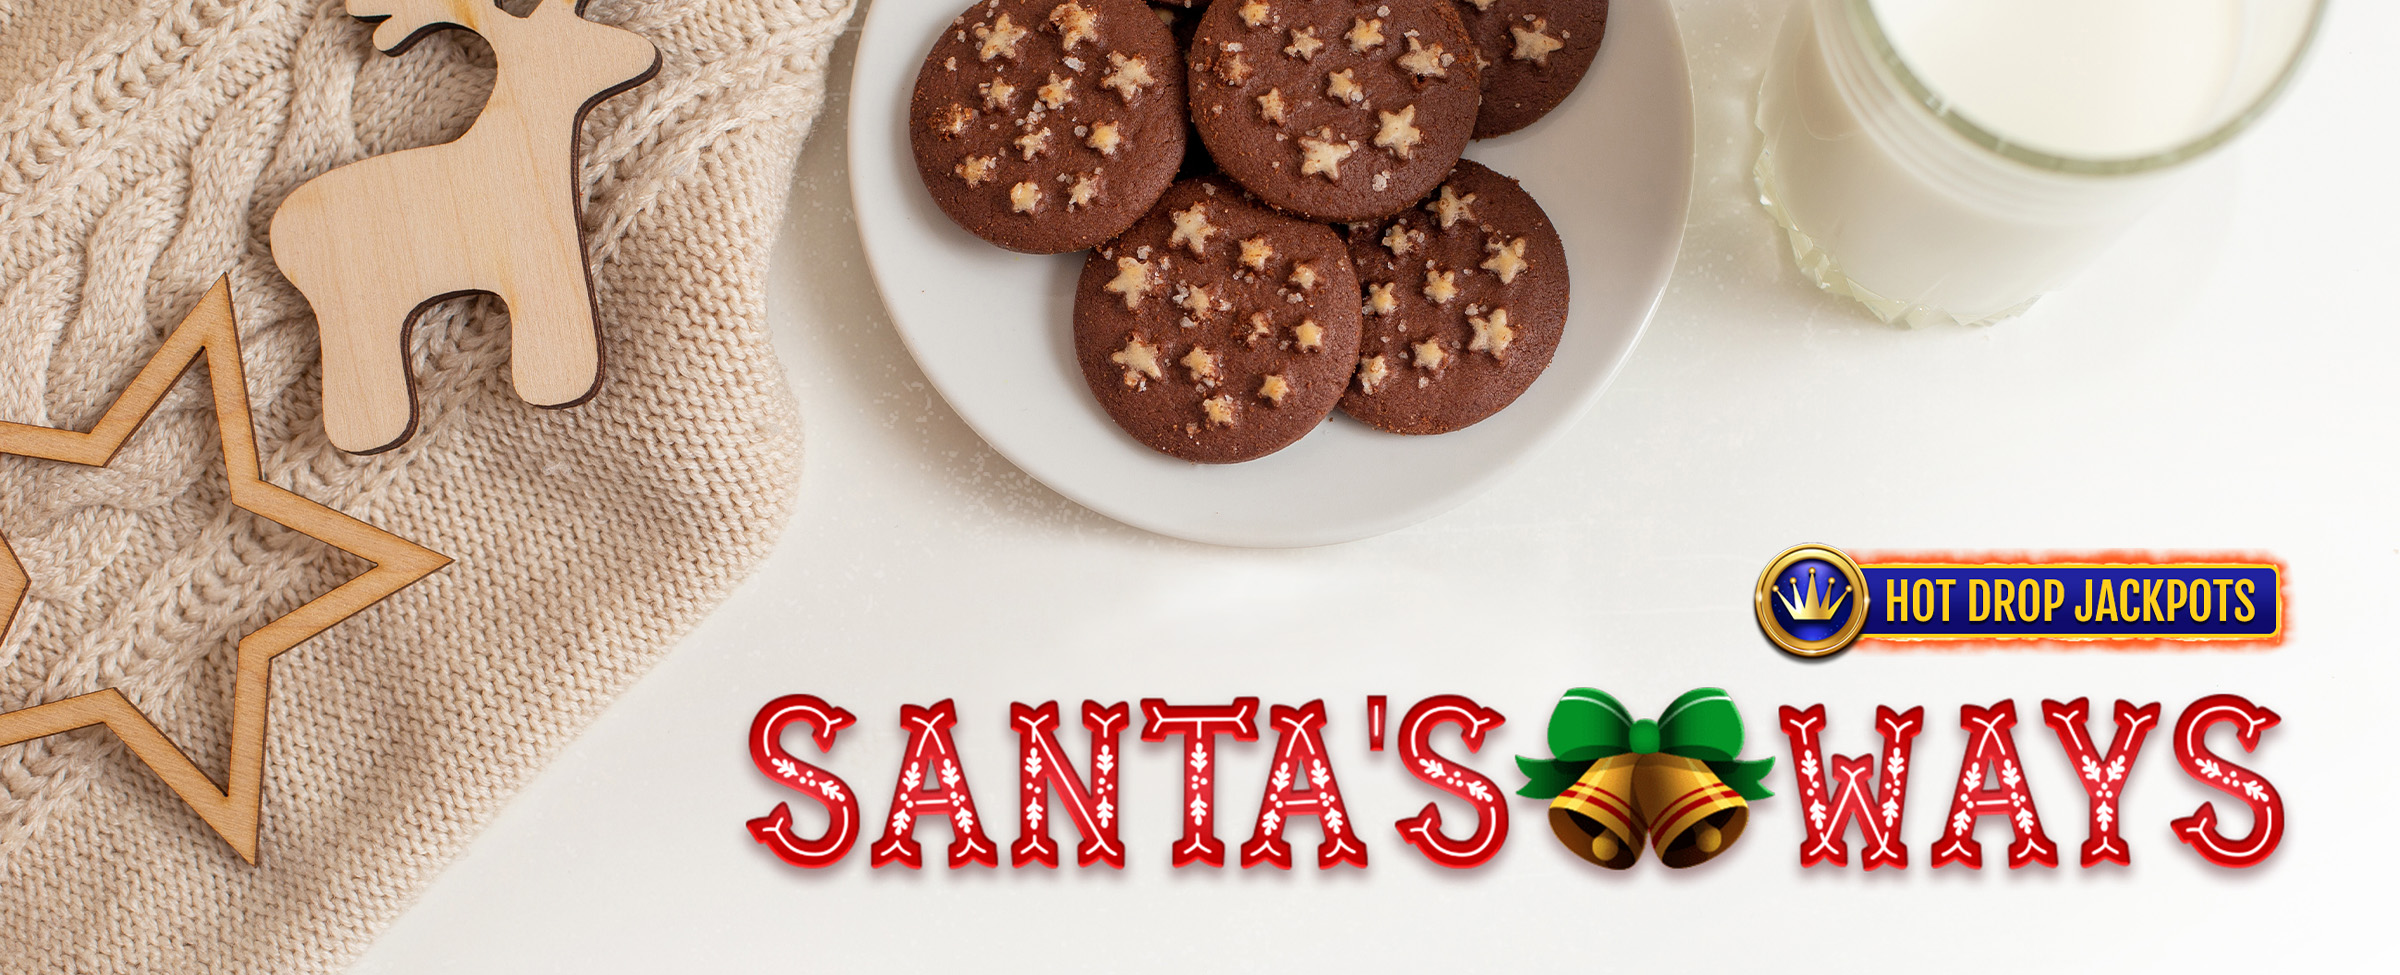 Chocolate cookies dusted in cocoa are piled on a white plate, sitting next to a white Christmas sweater with wooden cut-out shapes of a reindeer and a star, a glass of milk, and the Santa’s Ways Hot Drop Jackpots logo from the Cafe Casino slot game of the same name.